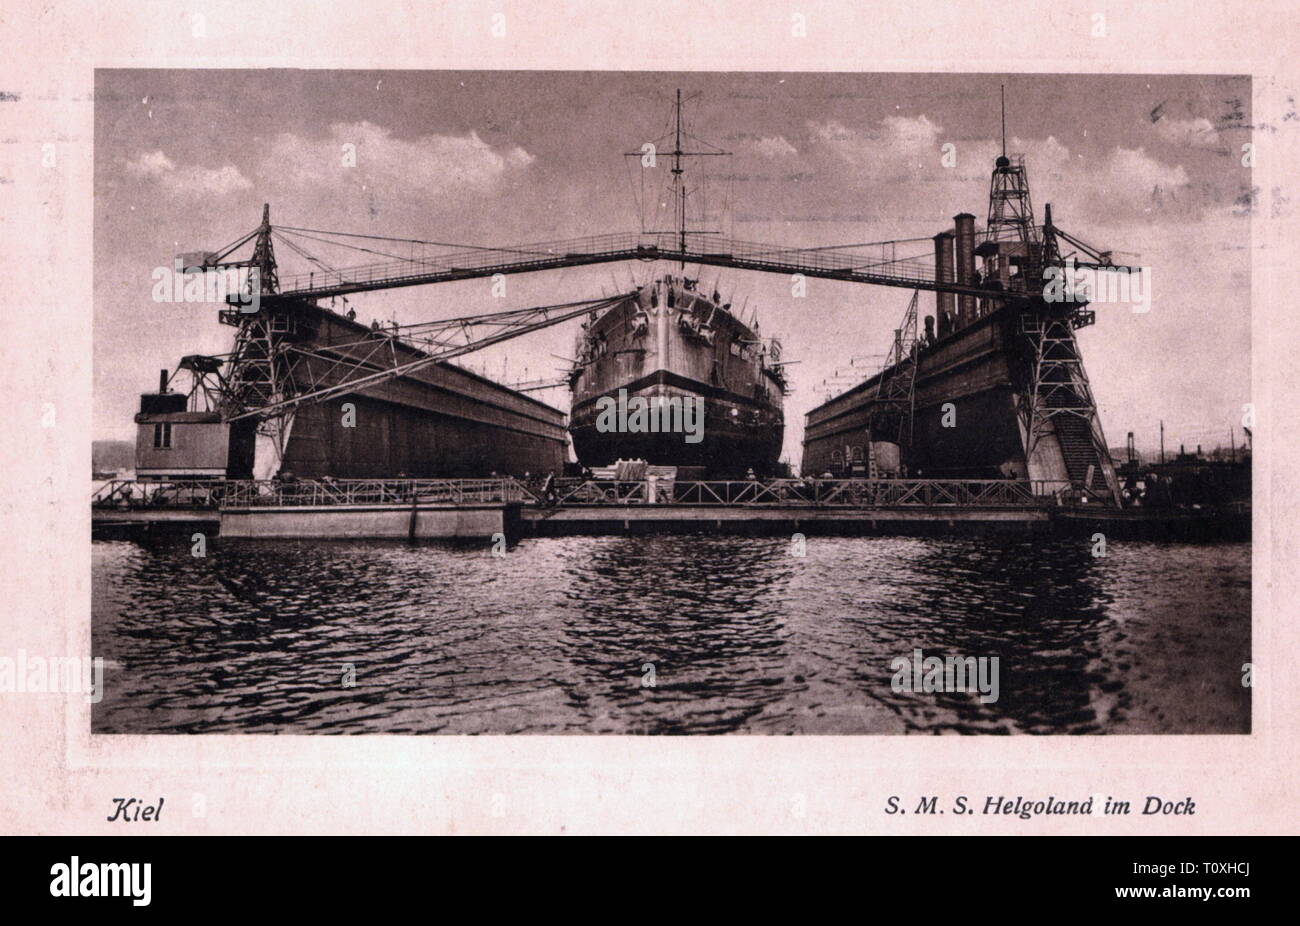 First World War / WWI, naval warfare, German dreadnought SMS 'Helgoland' in the dock after the Battle of Jutland, Imperial dockyard, picture postcard, postmarked 23.8.1916, naval battle, naval battles, battle, battles, Skagerrak, dockyard, dockyards, dry dock, dry docks, reparation, repair, ship of the line, warship, warships, navy, Imperial German Navy, German Empire, GER, WW1, 10s, 20th century, 1910s, world war, world wars, naval war, naval wars, dock, docks, picture postcard, picture postcards, historic, historical, Additional-Rights-Clearance-Info-Not-Available Stock Photo